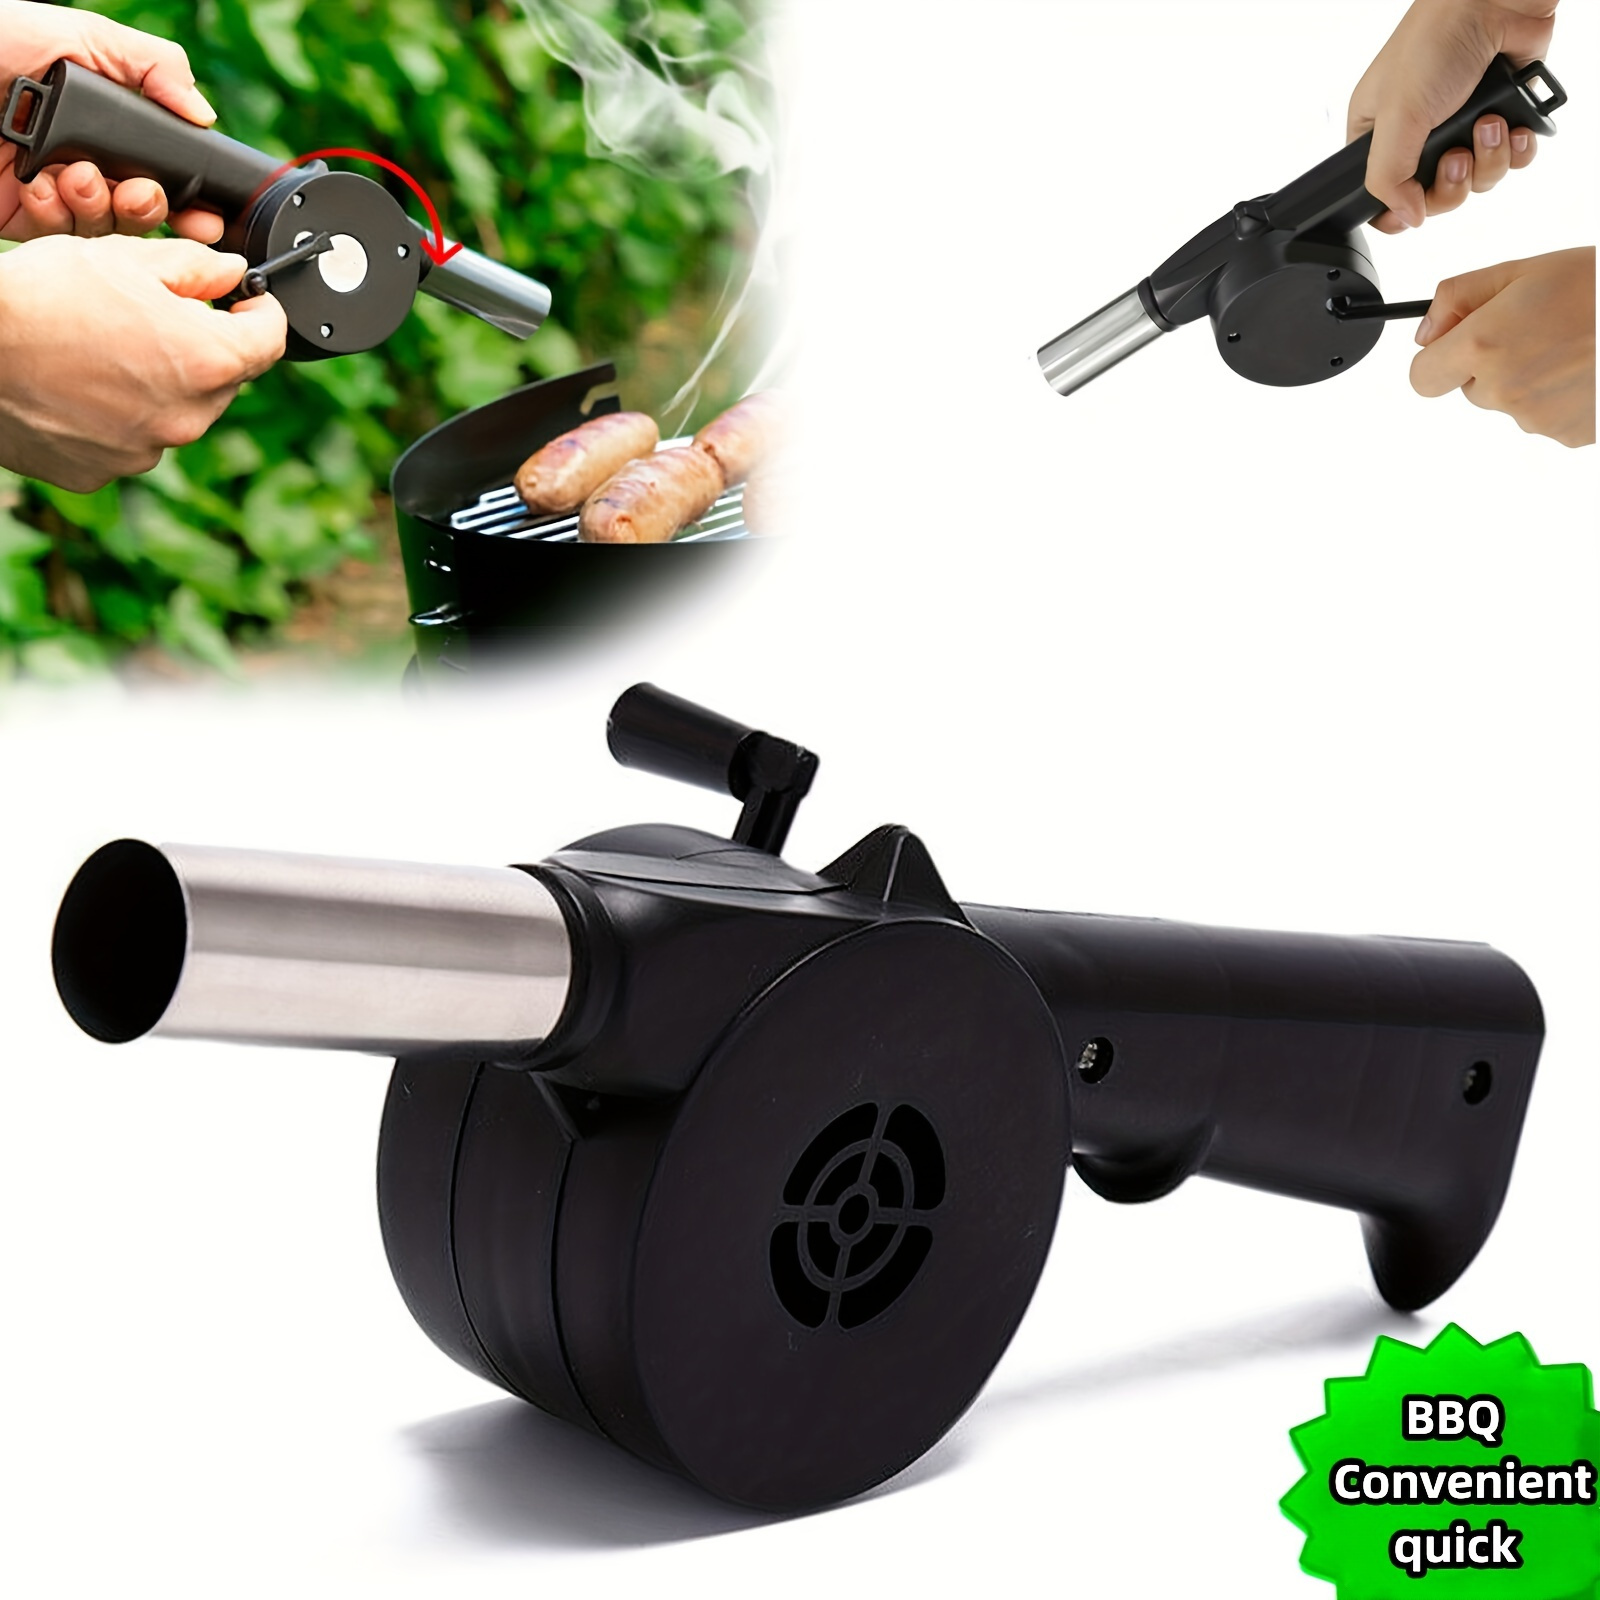 Cordless Electric Air Blower Handheld Leaf Blower Dust Collector Sweeper  Bbq Grill Fire Bellows Tools With Li-ion Battery